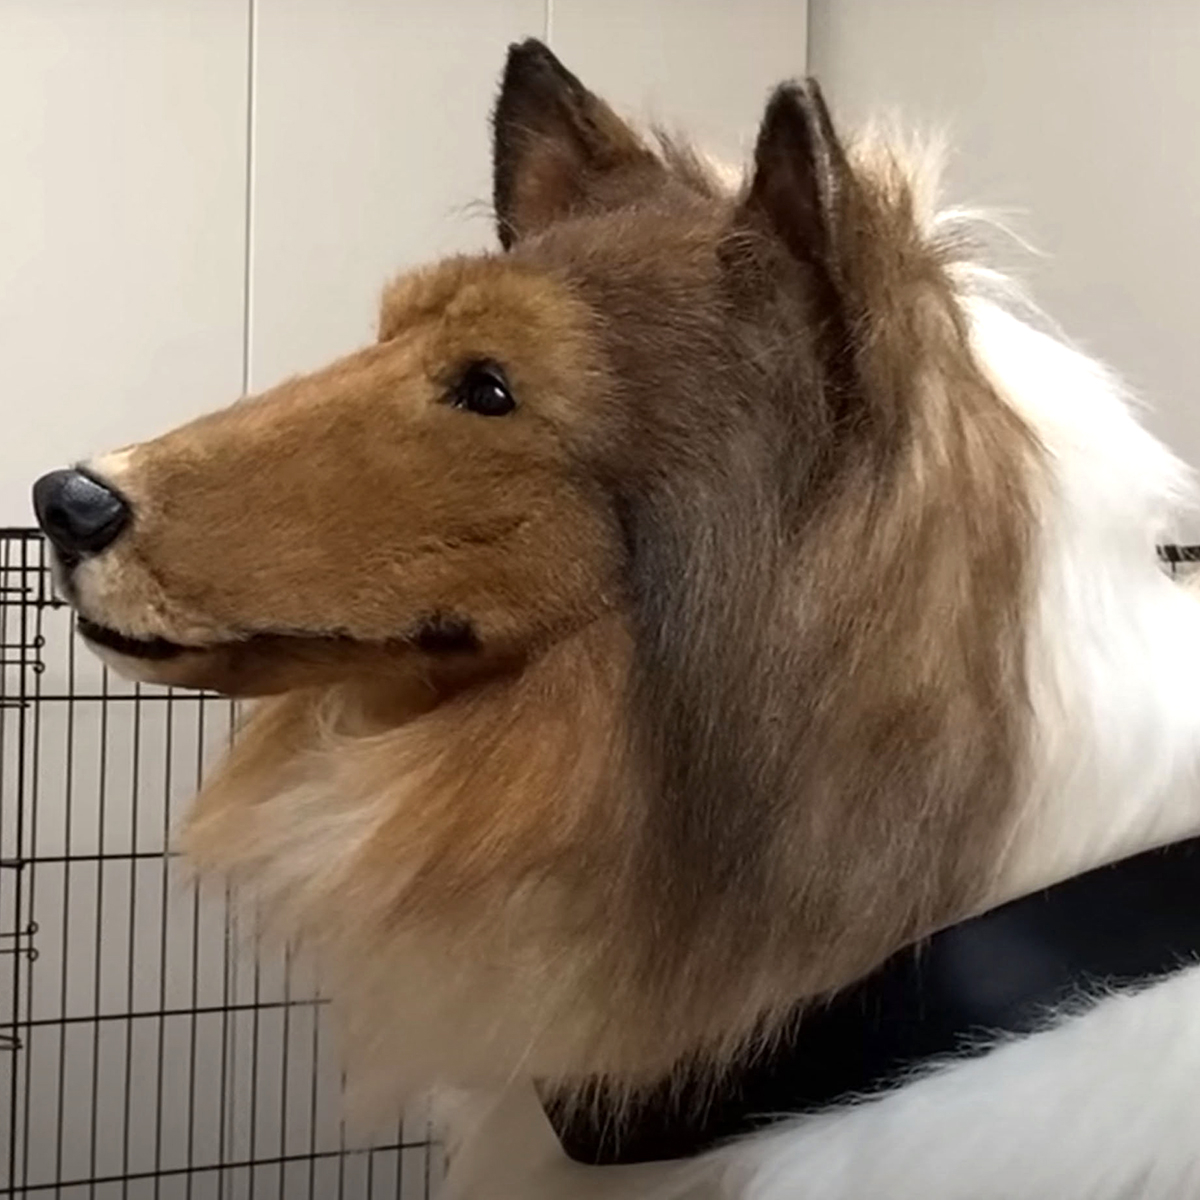 Dogs and people's reactions to seeing a realistic dog costume